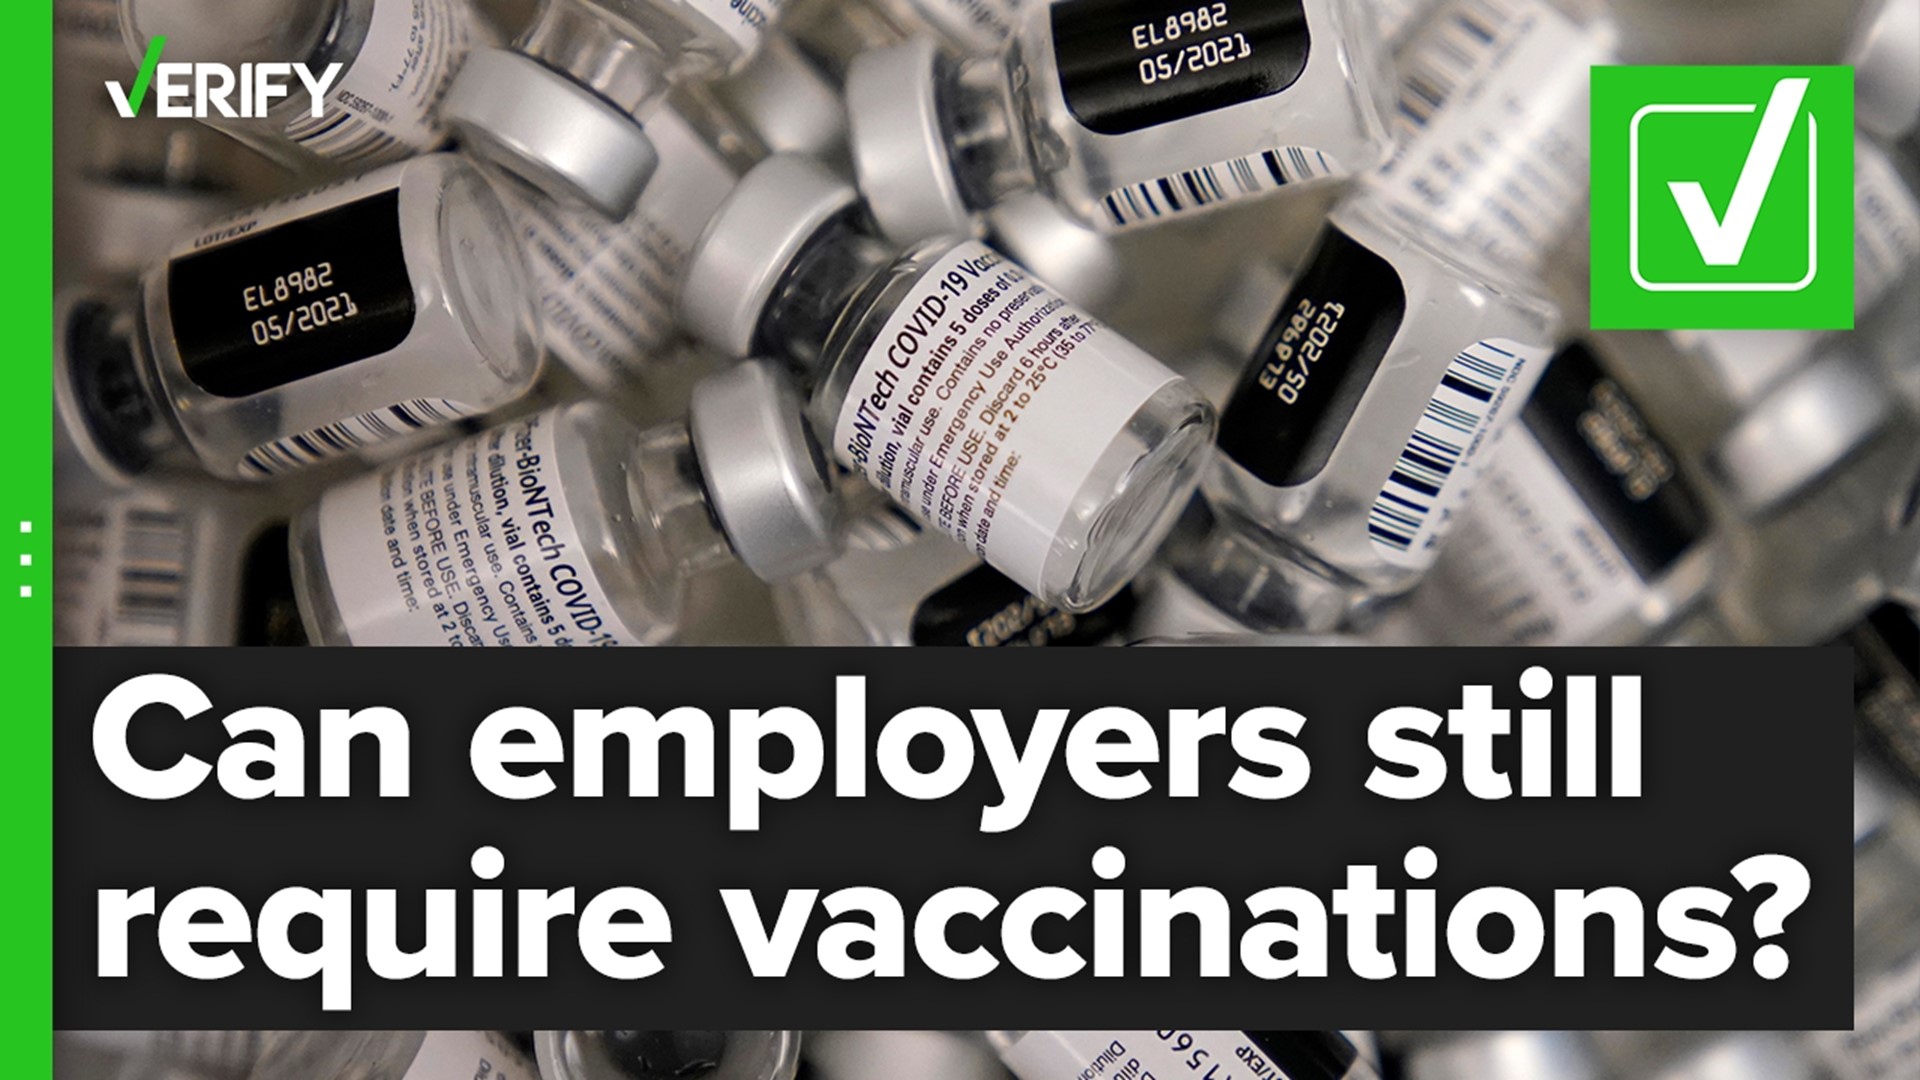 Can employers still require employees to get vaccinated or tested for COVID-19? The VERIFY team confirms this is true.